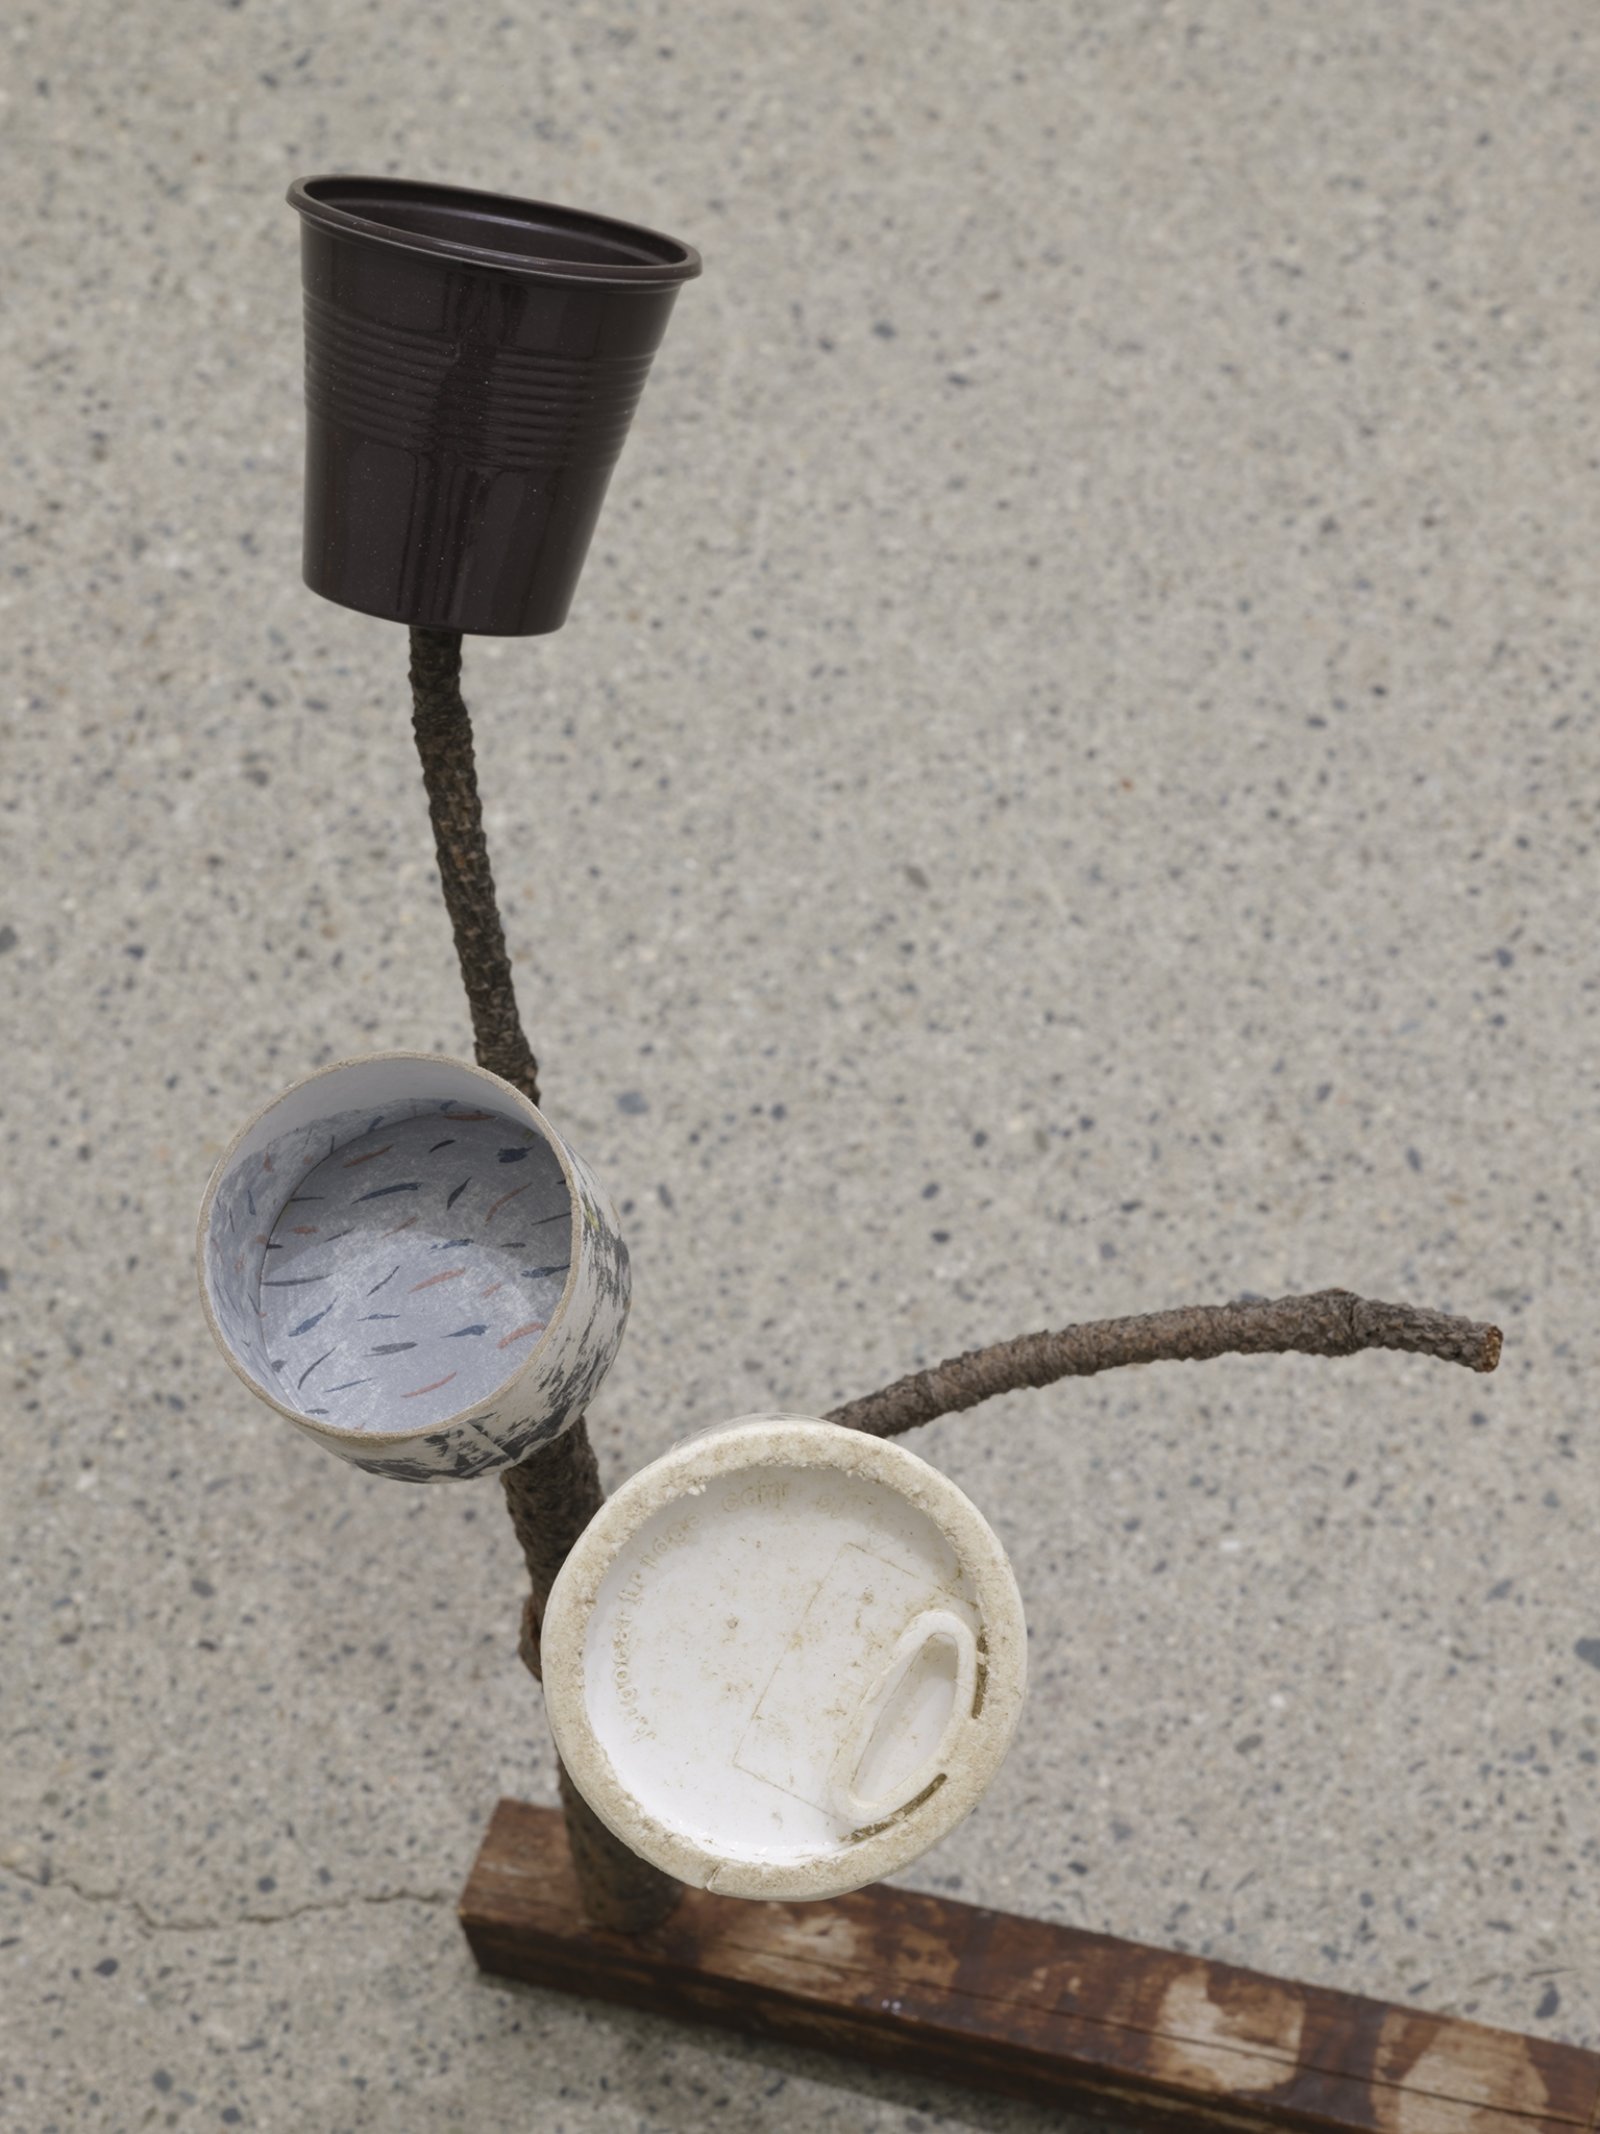 ​Ashes Withyman, Formula describing a soul rumbling off through the sky after leaving the body (detail), 2019, found branches, plywood with paint, plastic espresso cup, paper cup, lid, cardboard, push pin, 12 x 25 x 10 in. (31 x 64 x 25 cm)​ by Ashes Withyman